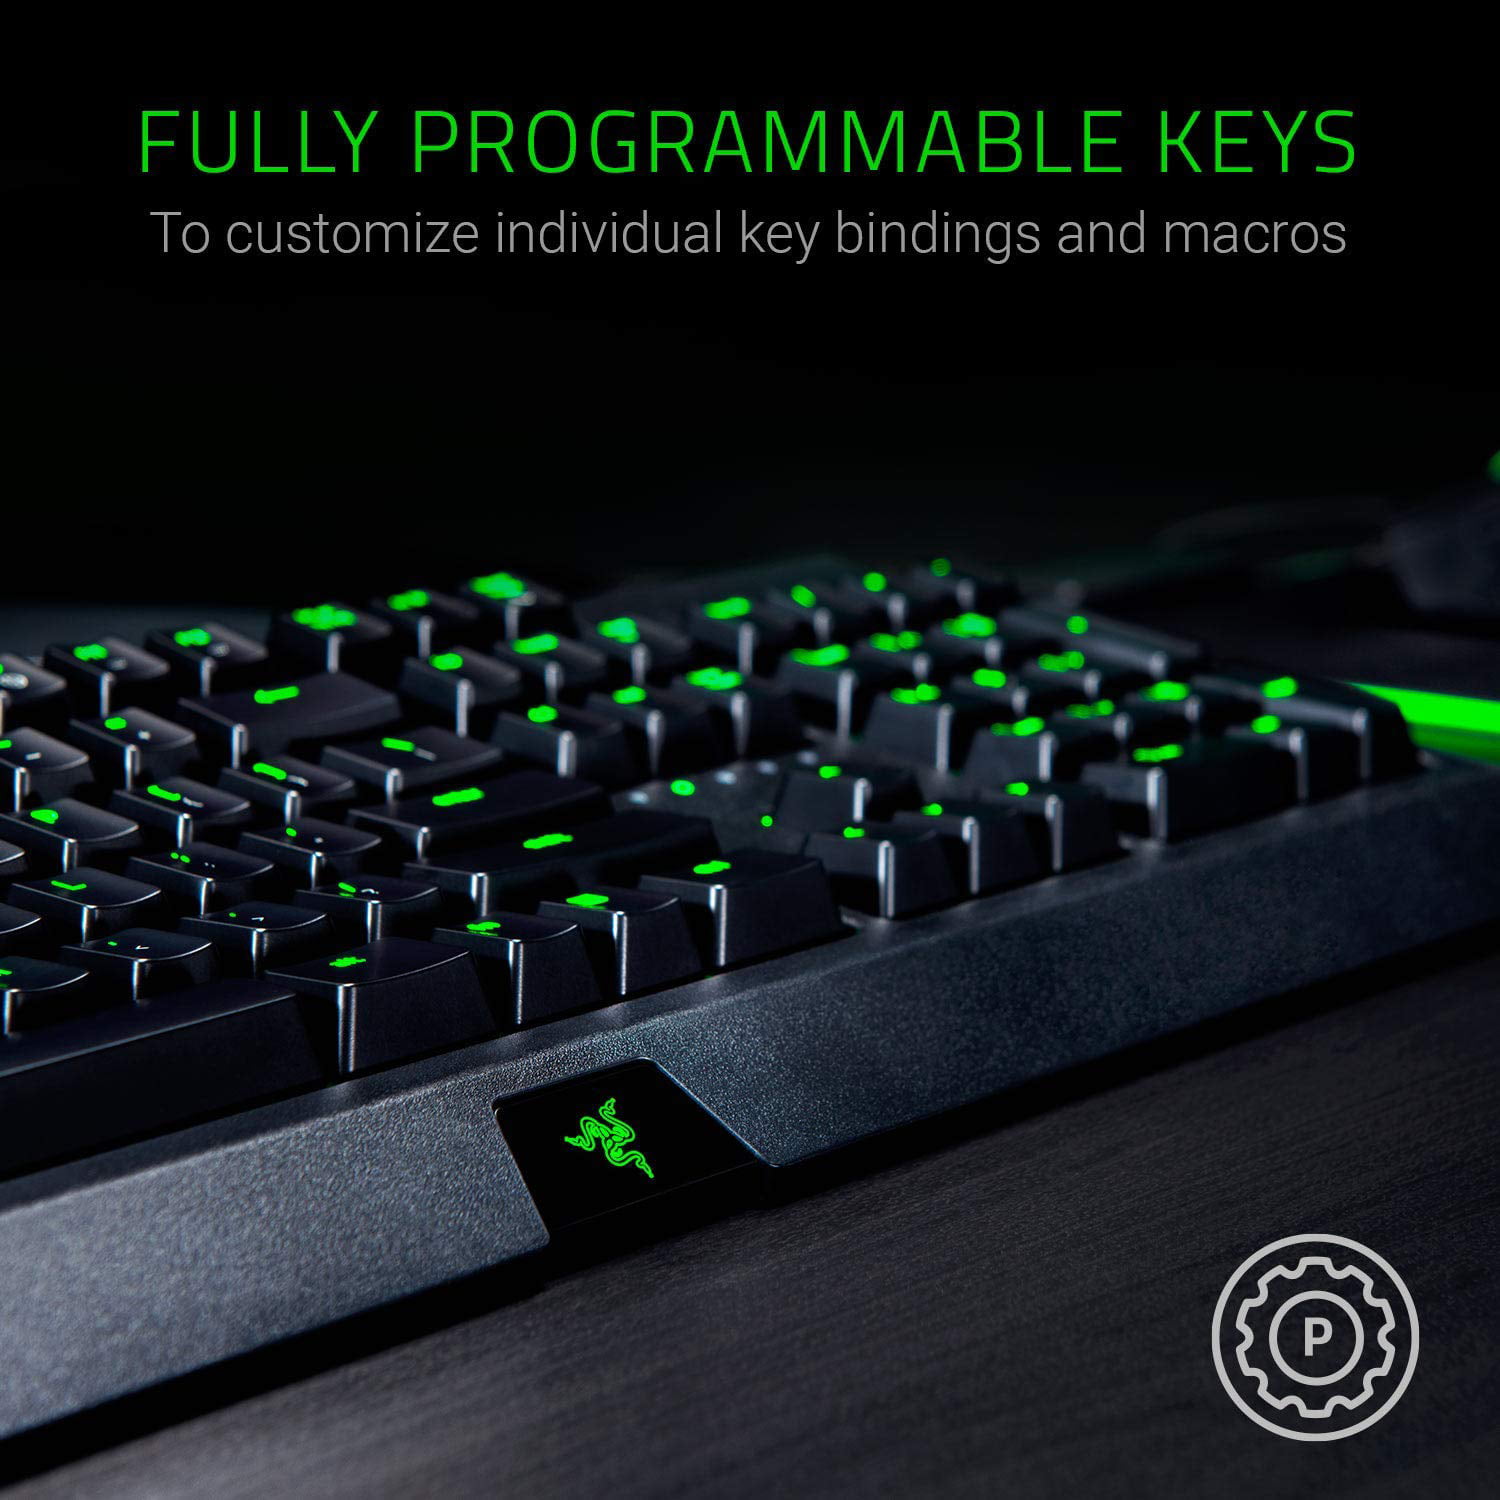  Razer BlackWidow Mechanical Gaming Keyboard: Green Mechanical  Switches - Tactile & Clicky - Chroma RGB Lighting - Anti-Ghosting -  Programmable Macro Functionality : Video Games